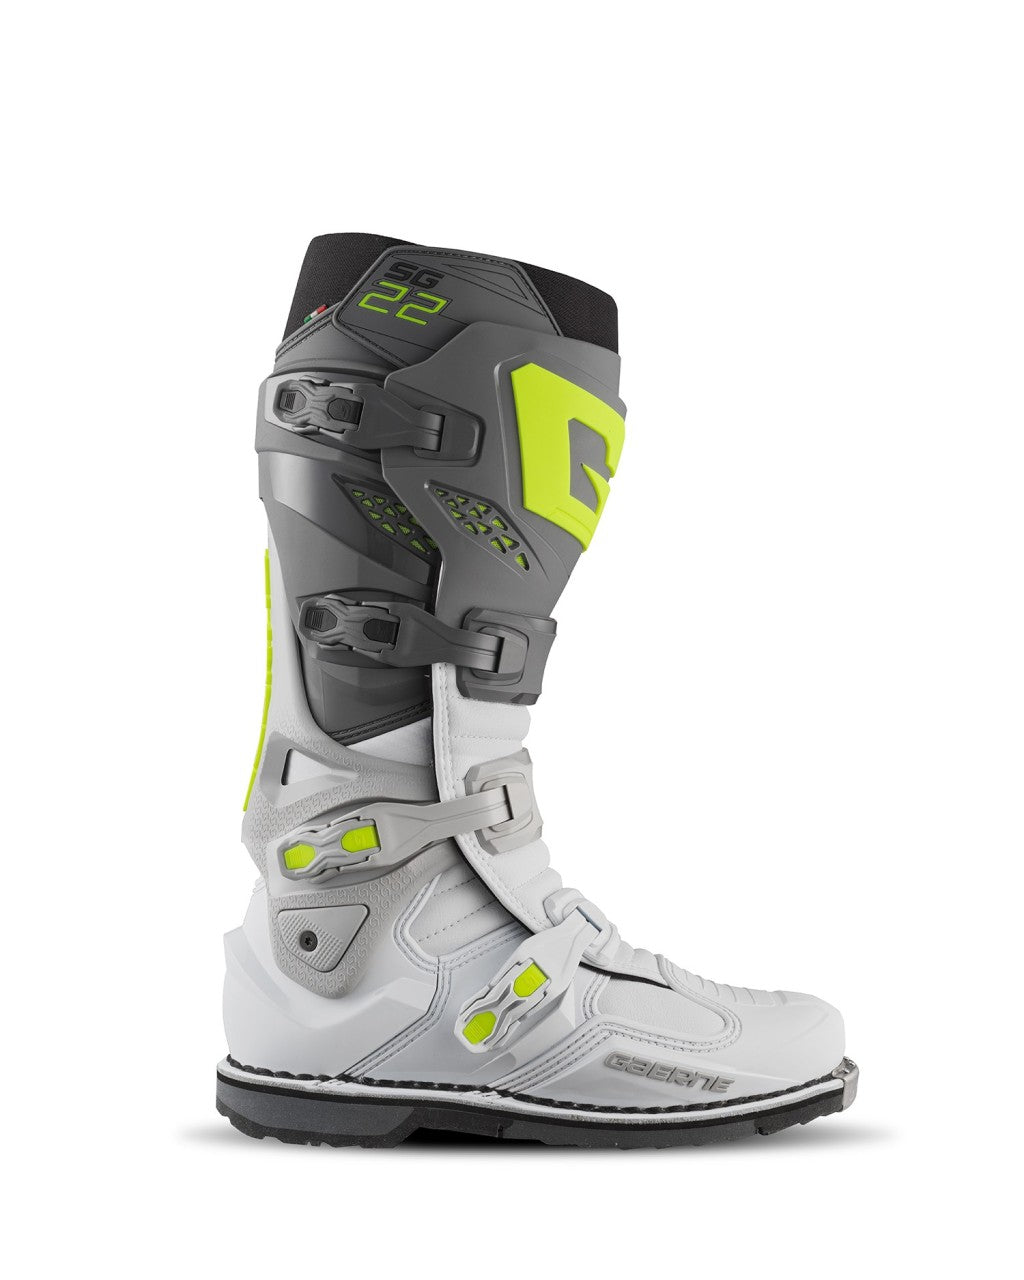 GAERNE SG22 ANTHRACITE/WHITE/GREY BOOTS